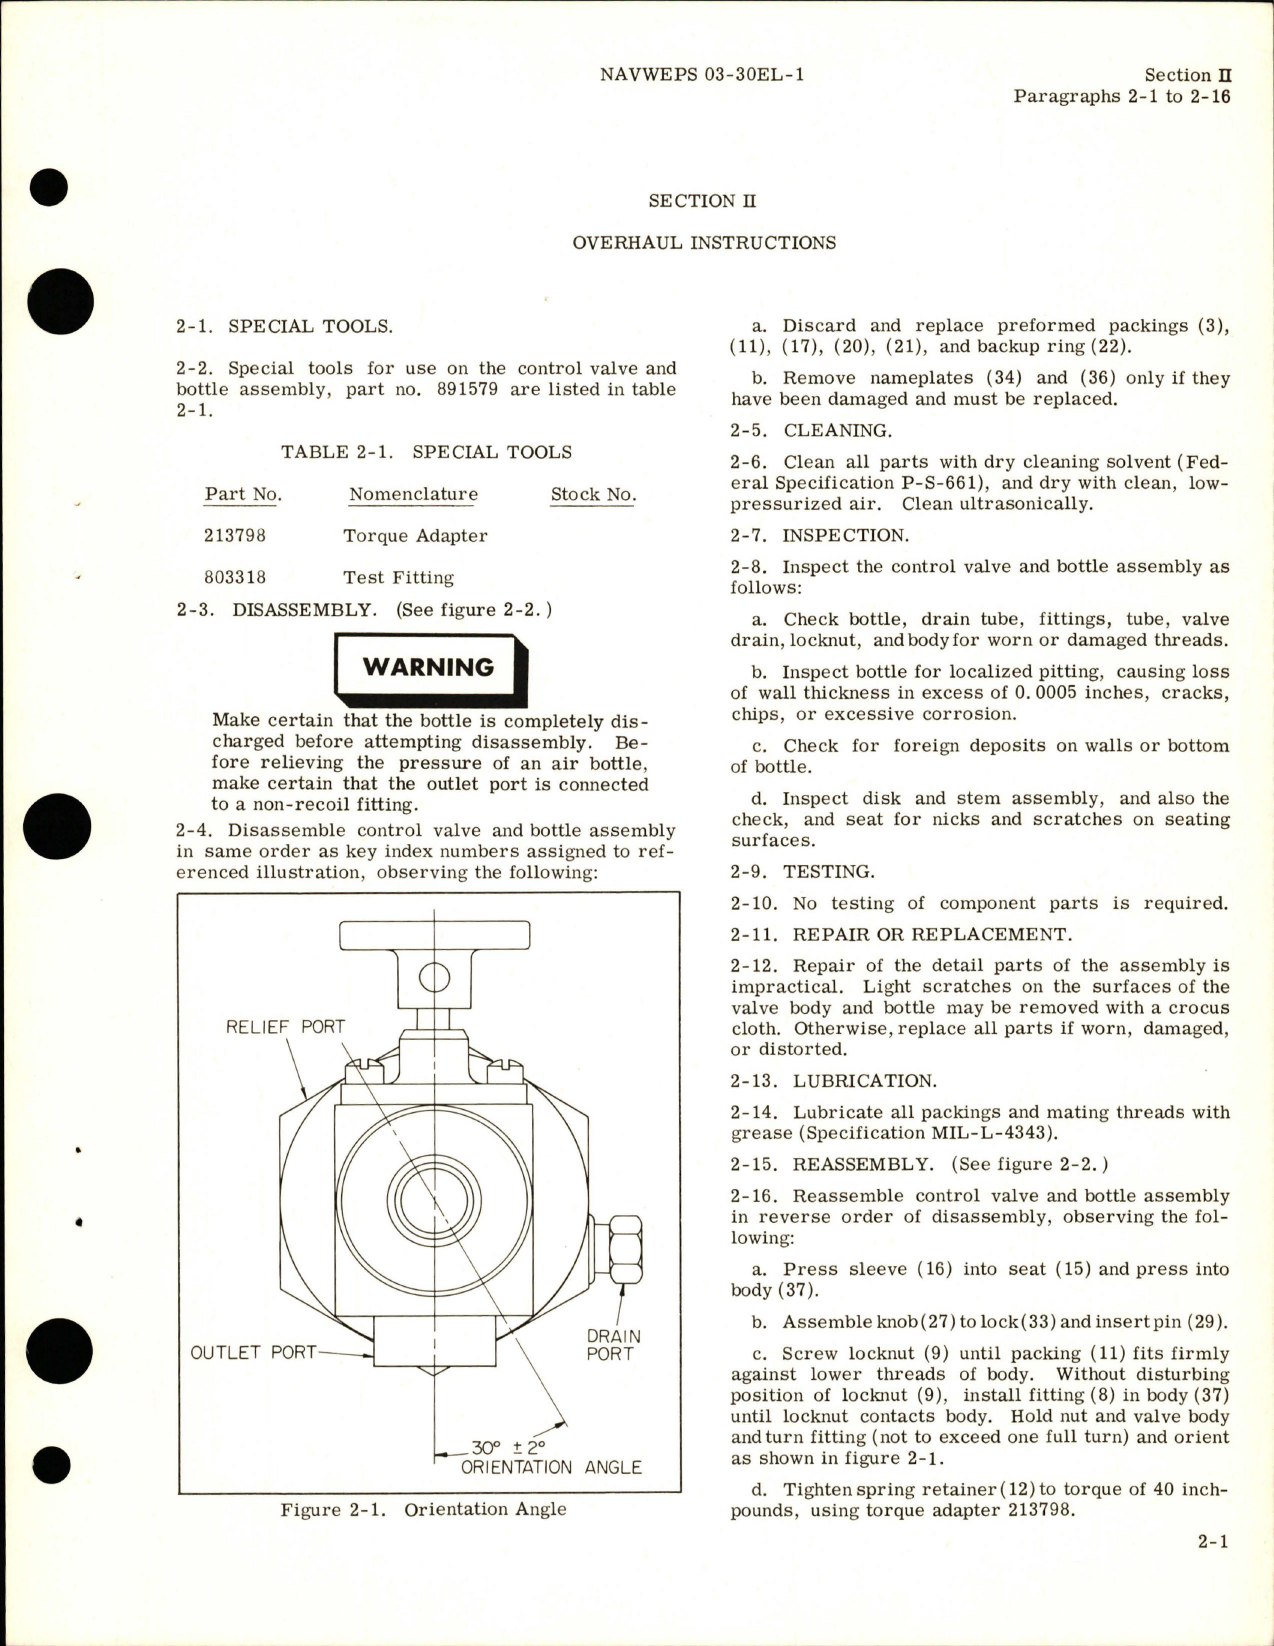 Sample page 7 from AirCorps Library document: Overhaul Instructions for Control Valve and Bottle Assembly - Part 891579